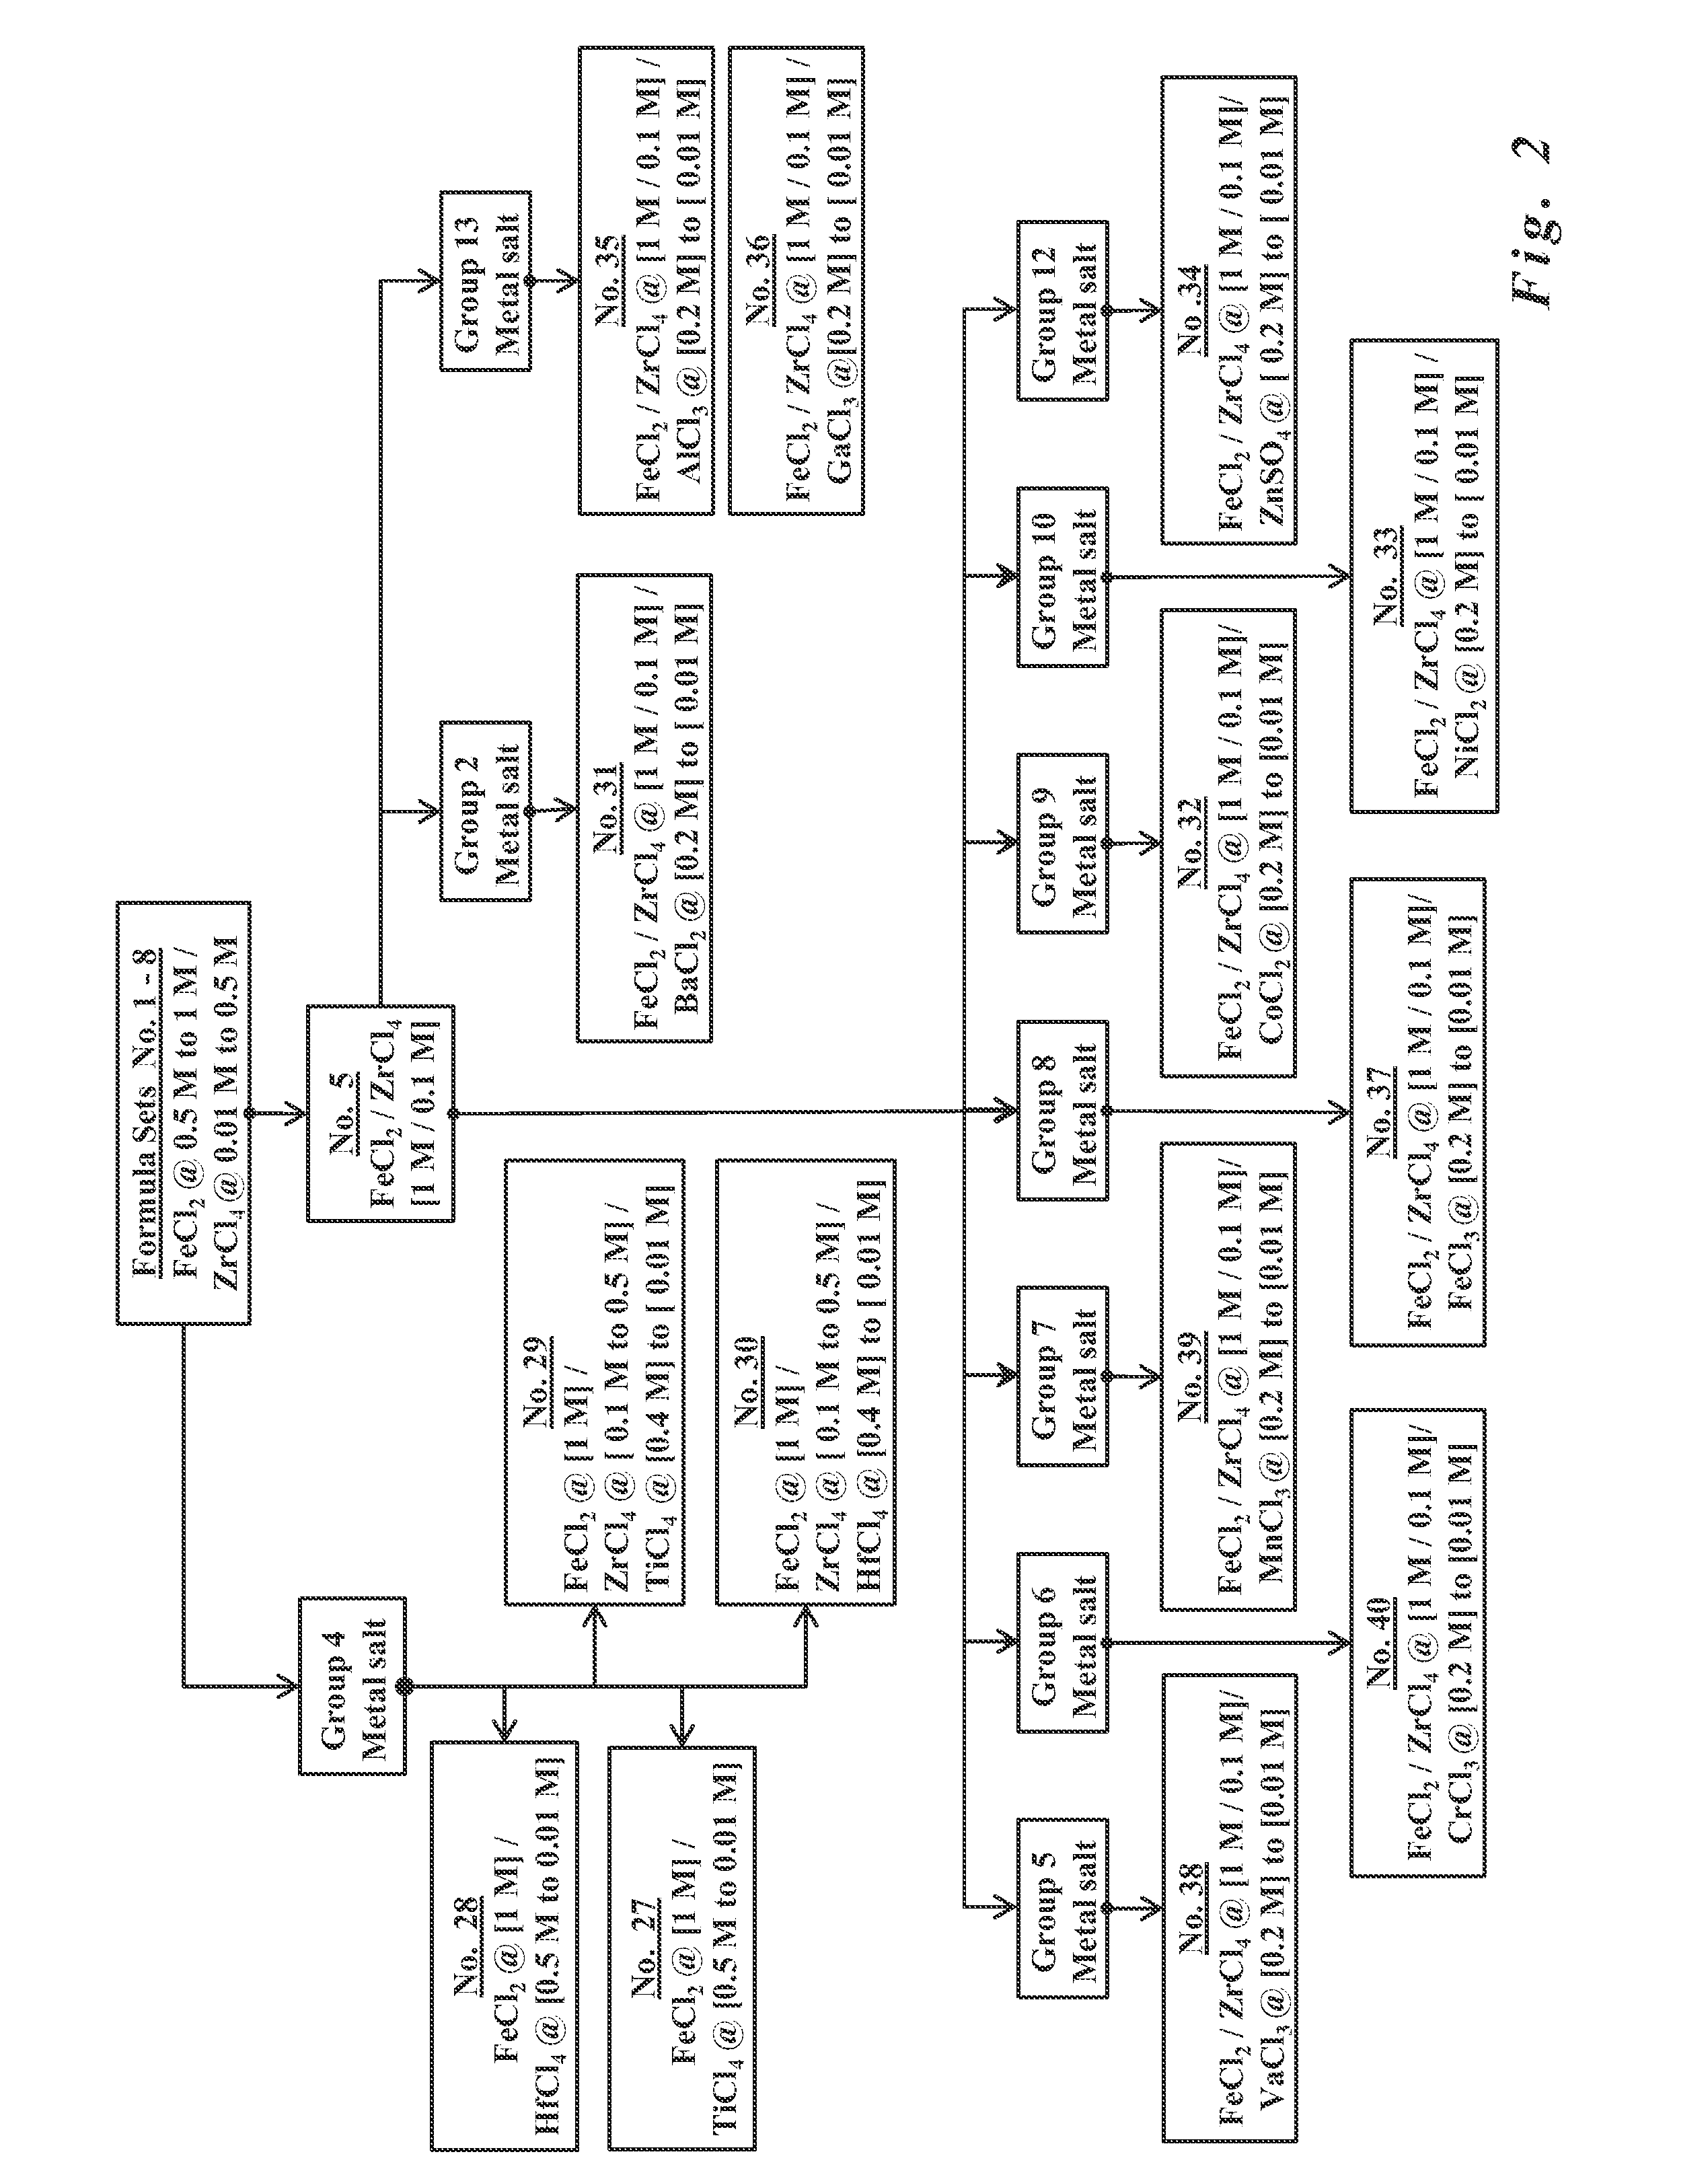 Formulations for the synthesis of paramagnetic particles and methods that utilize the particles for biochemical applications